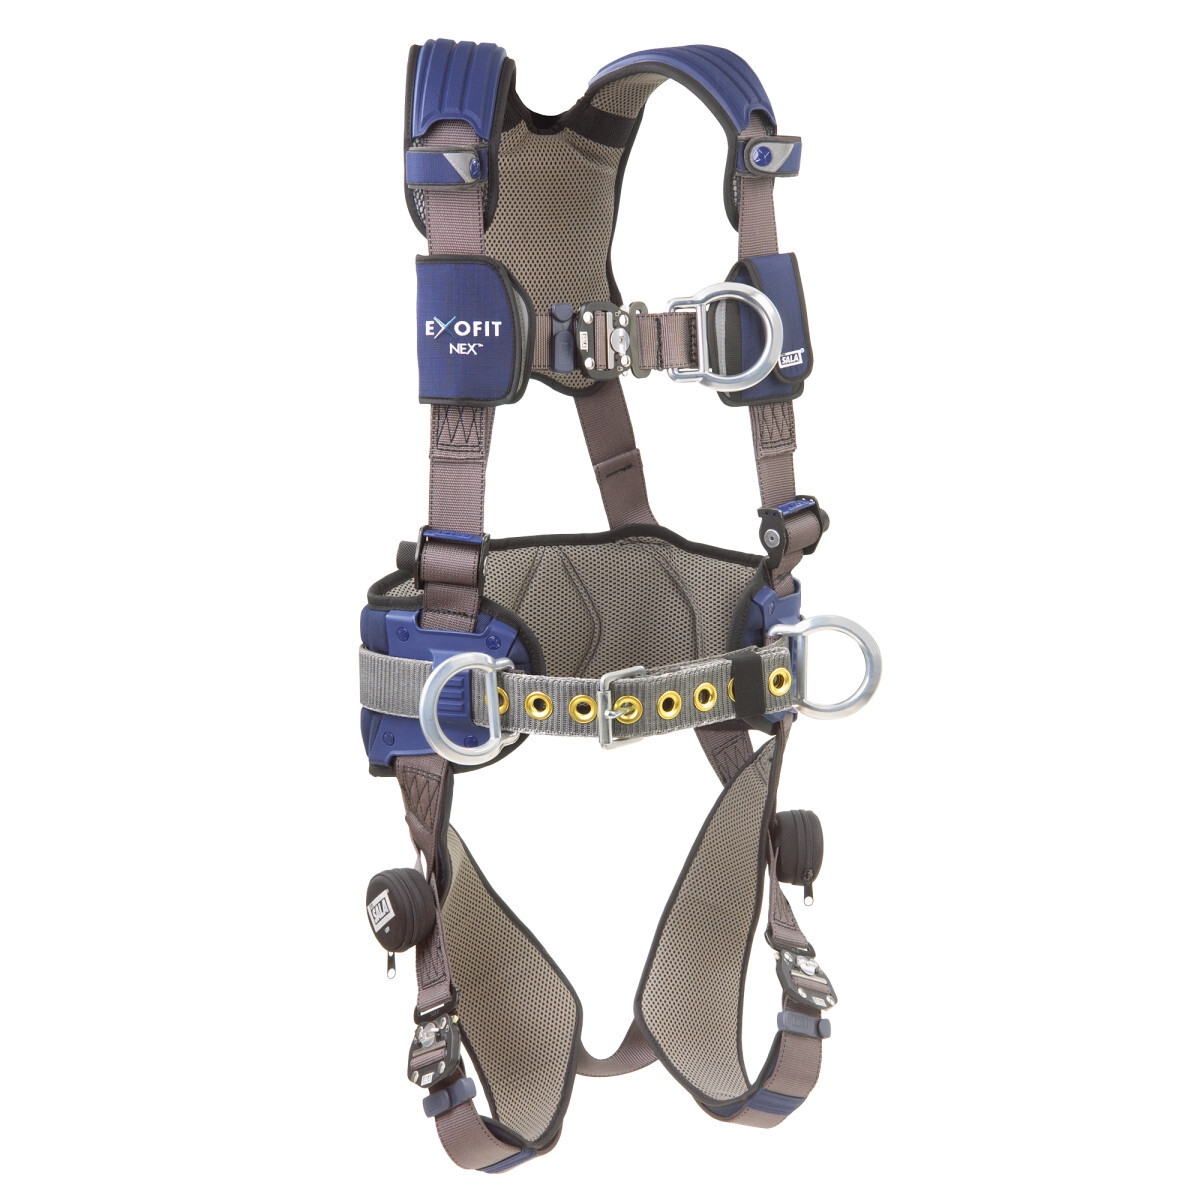 3M™ DBI-SALA® Medium ExoFit NEX™ Construction/Full Body Style Harness With Tech-Lite™ Aluminum Back, Front And Side D-Ring, Duo-